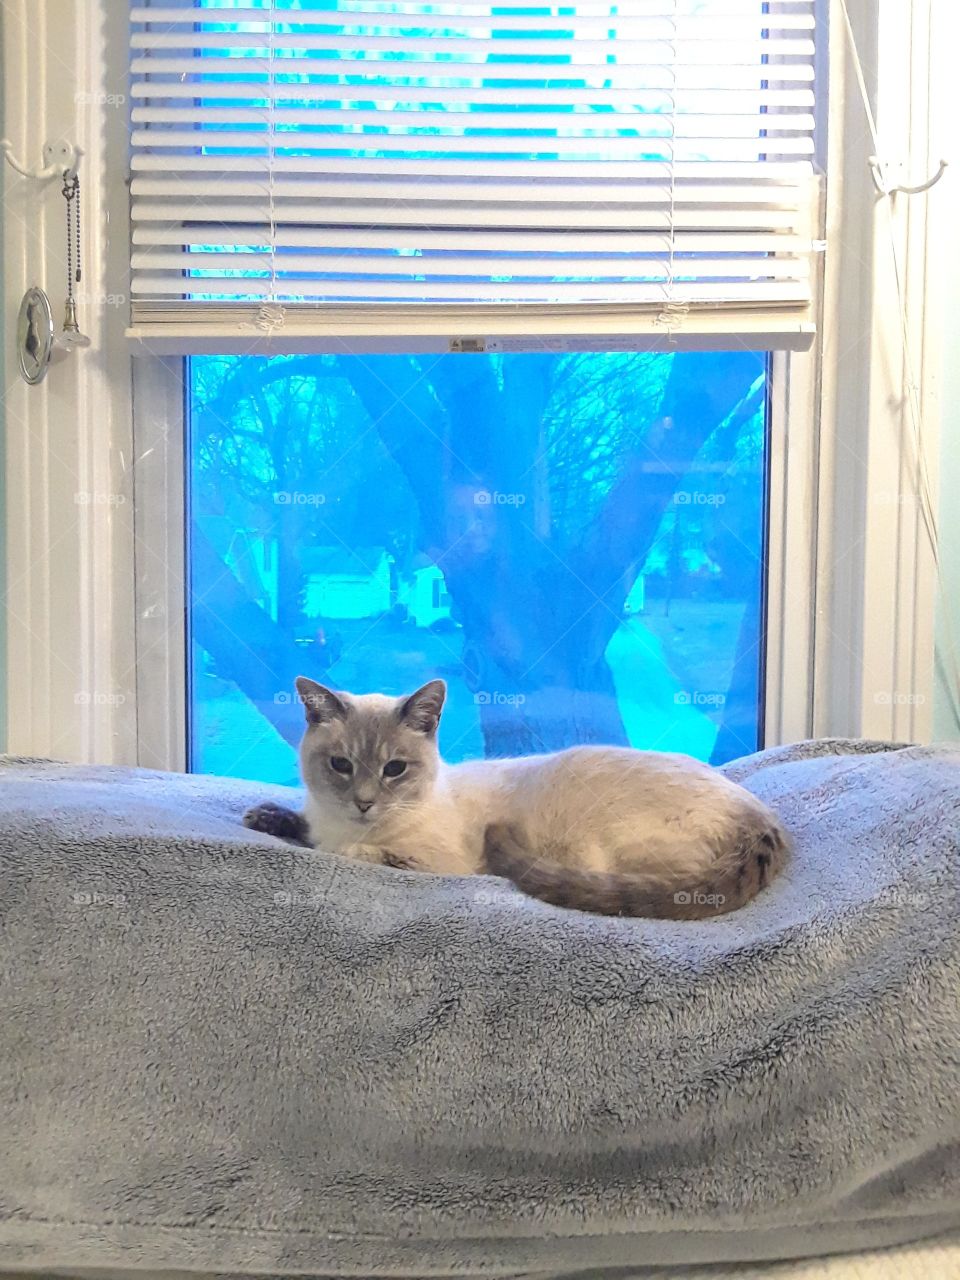 Siamese Tabby Cat relaxing in the window Gray blanket and blue window with a tree